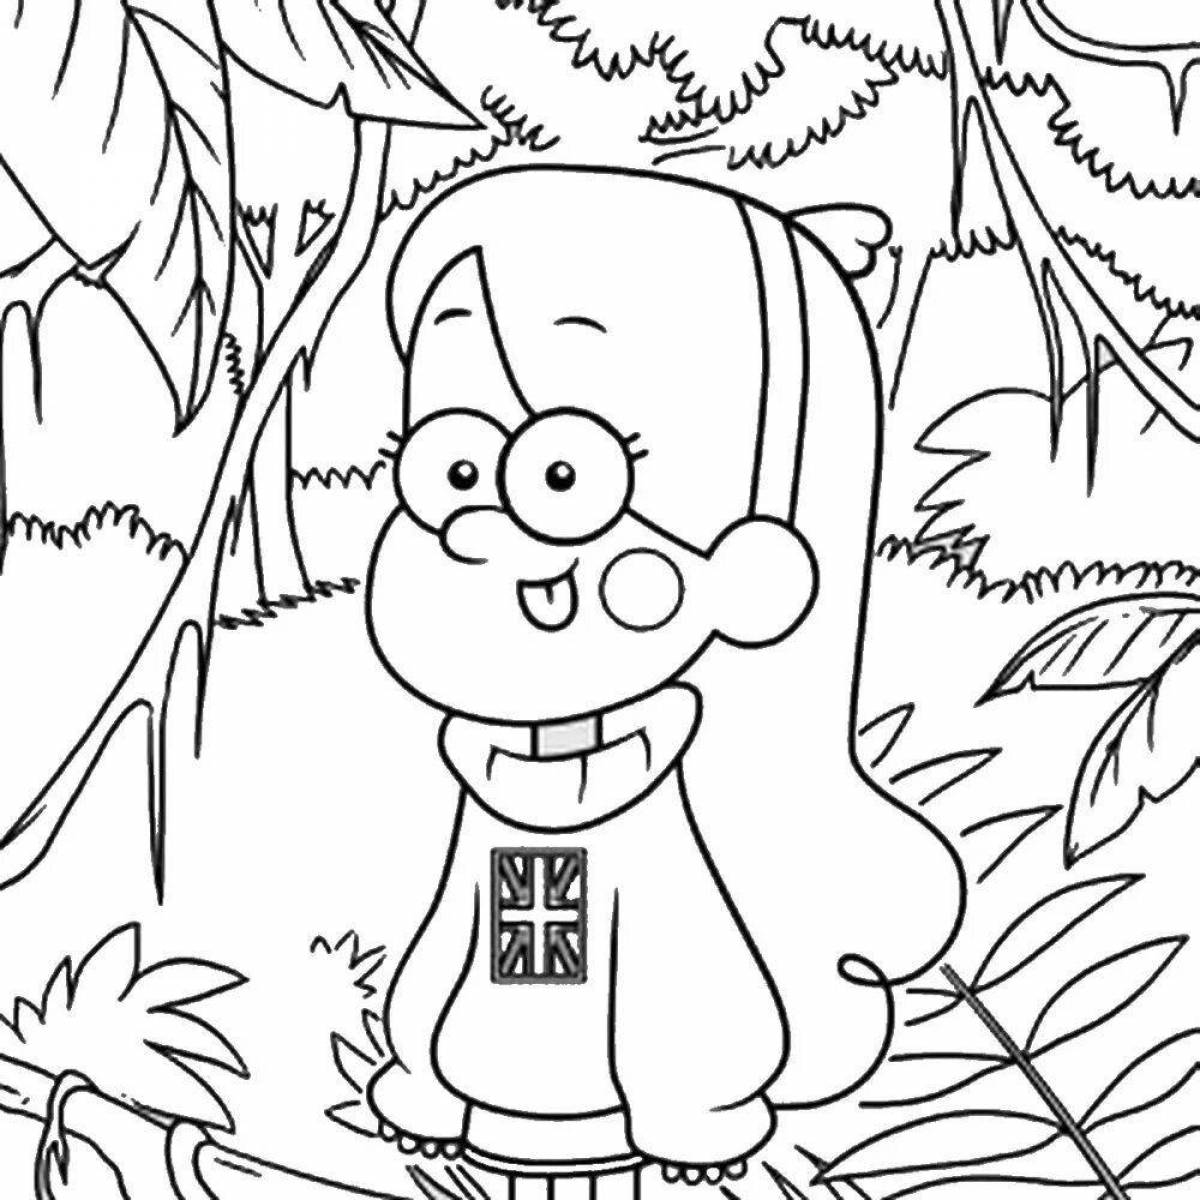 Dazzling coloring page 16